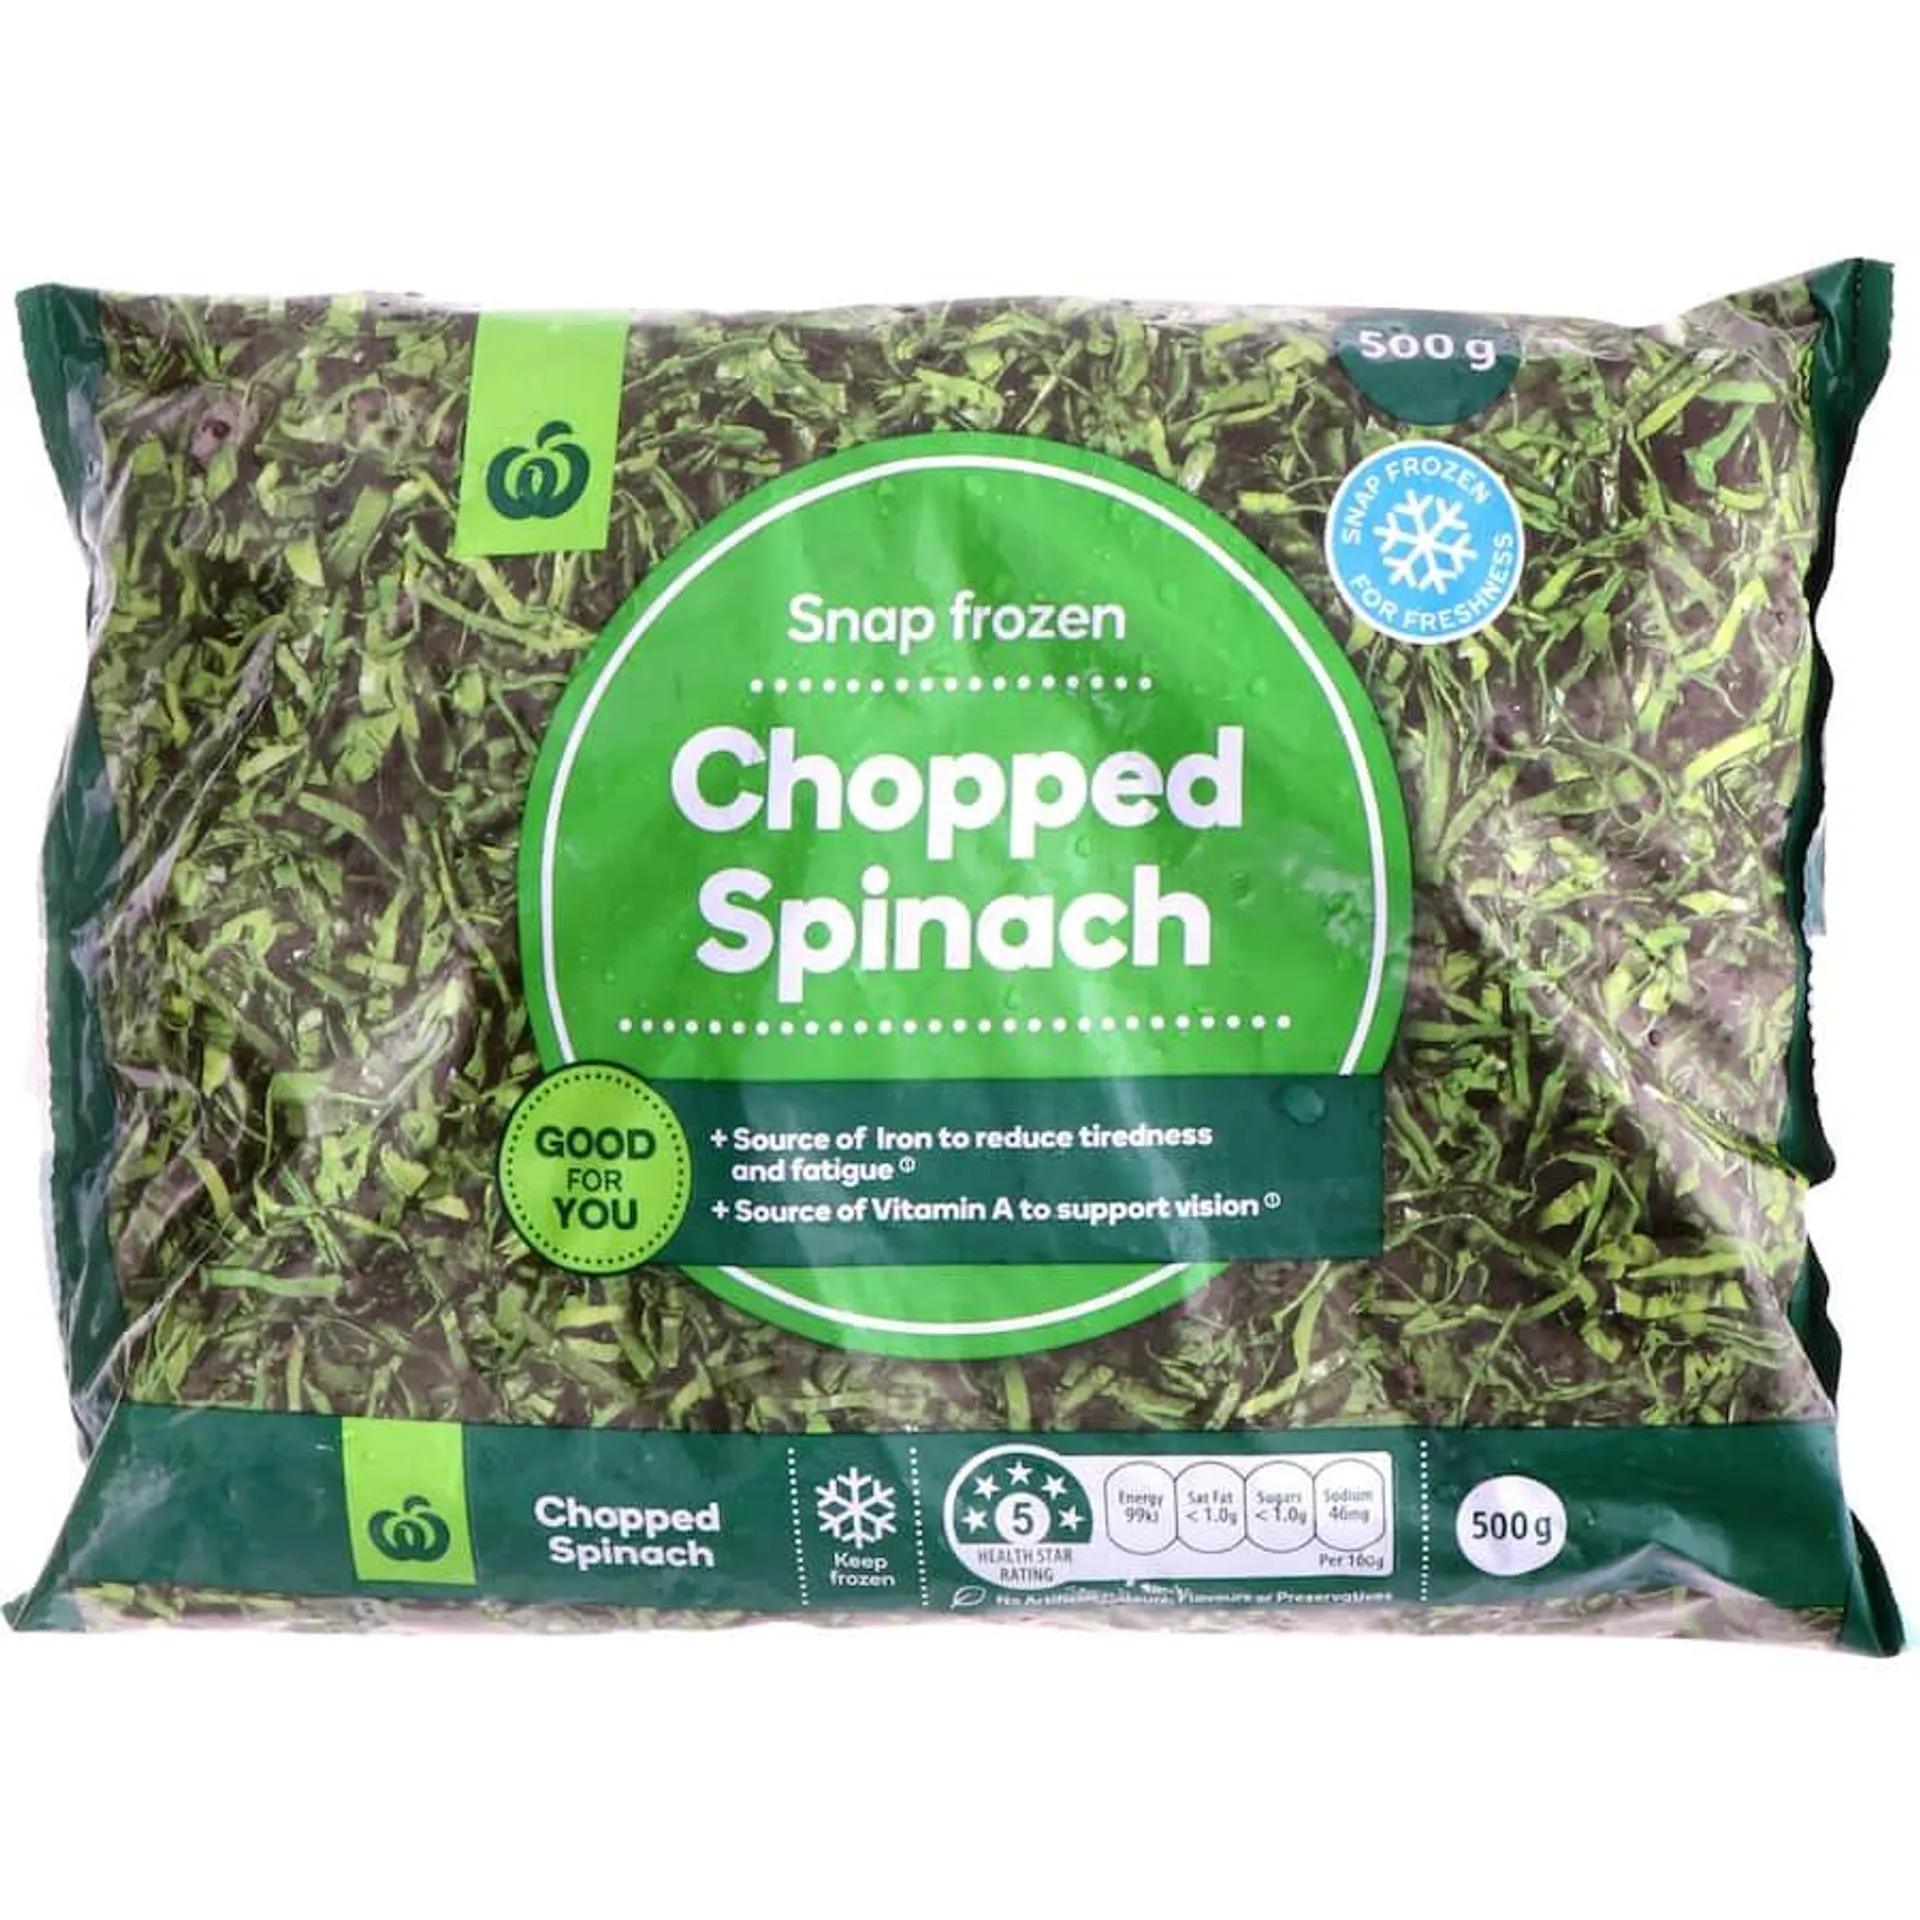 Woolworths Frozen Chopped Spinach